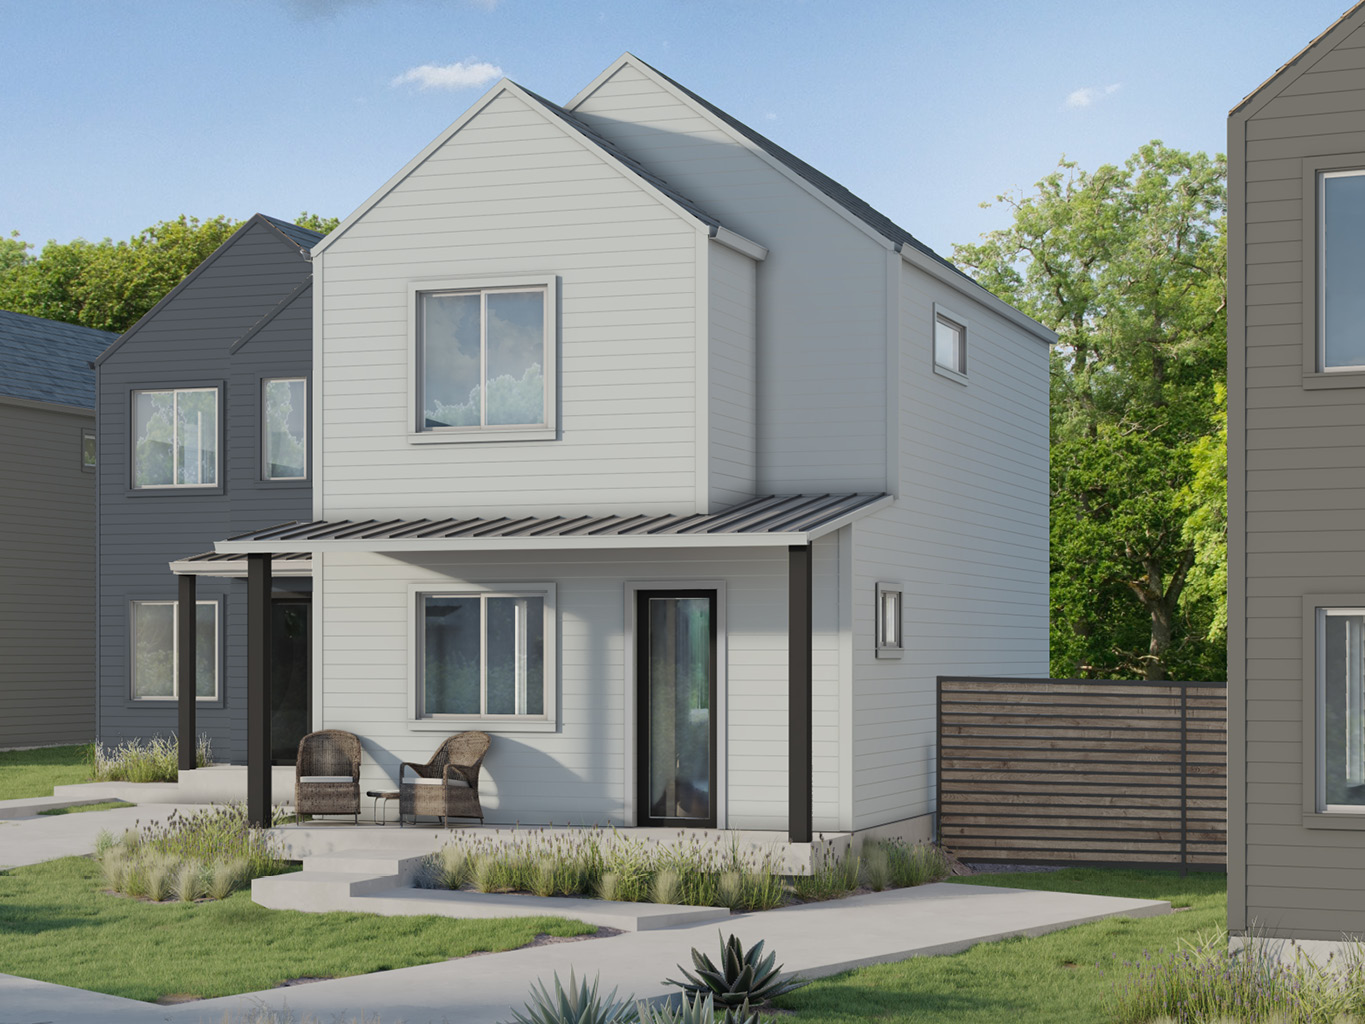 Lucy - Plan A - Exterior Rendering